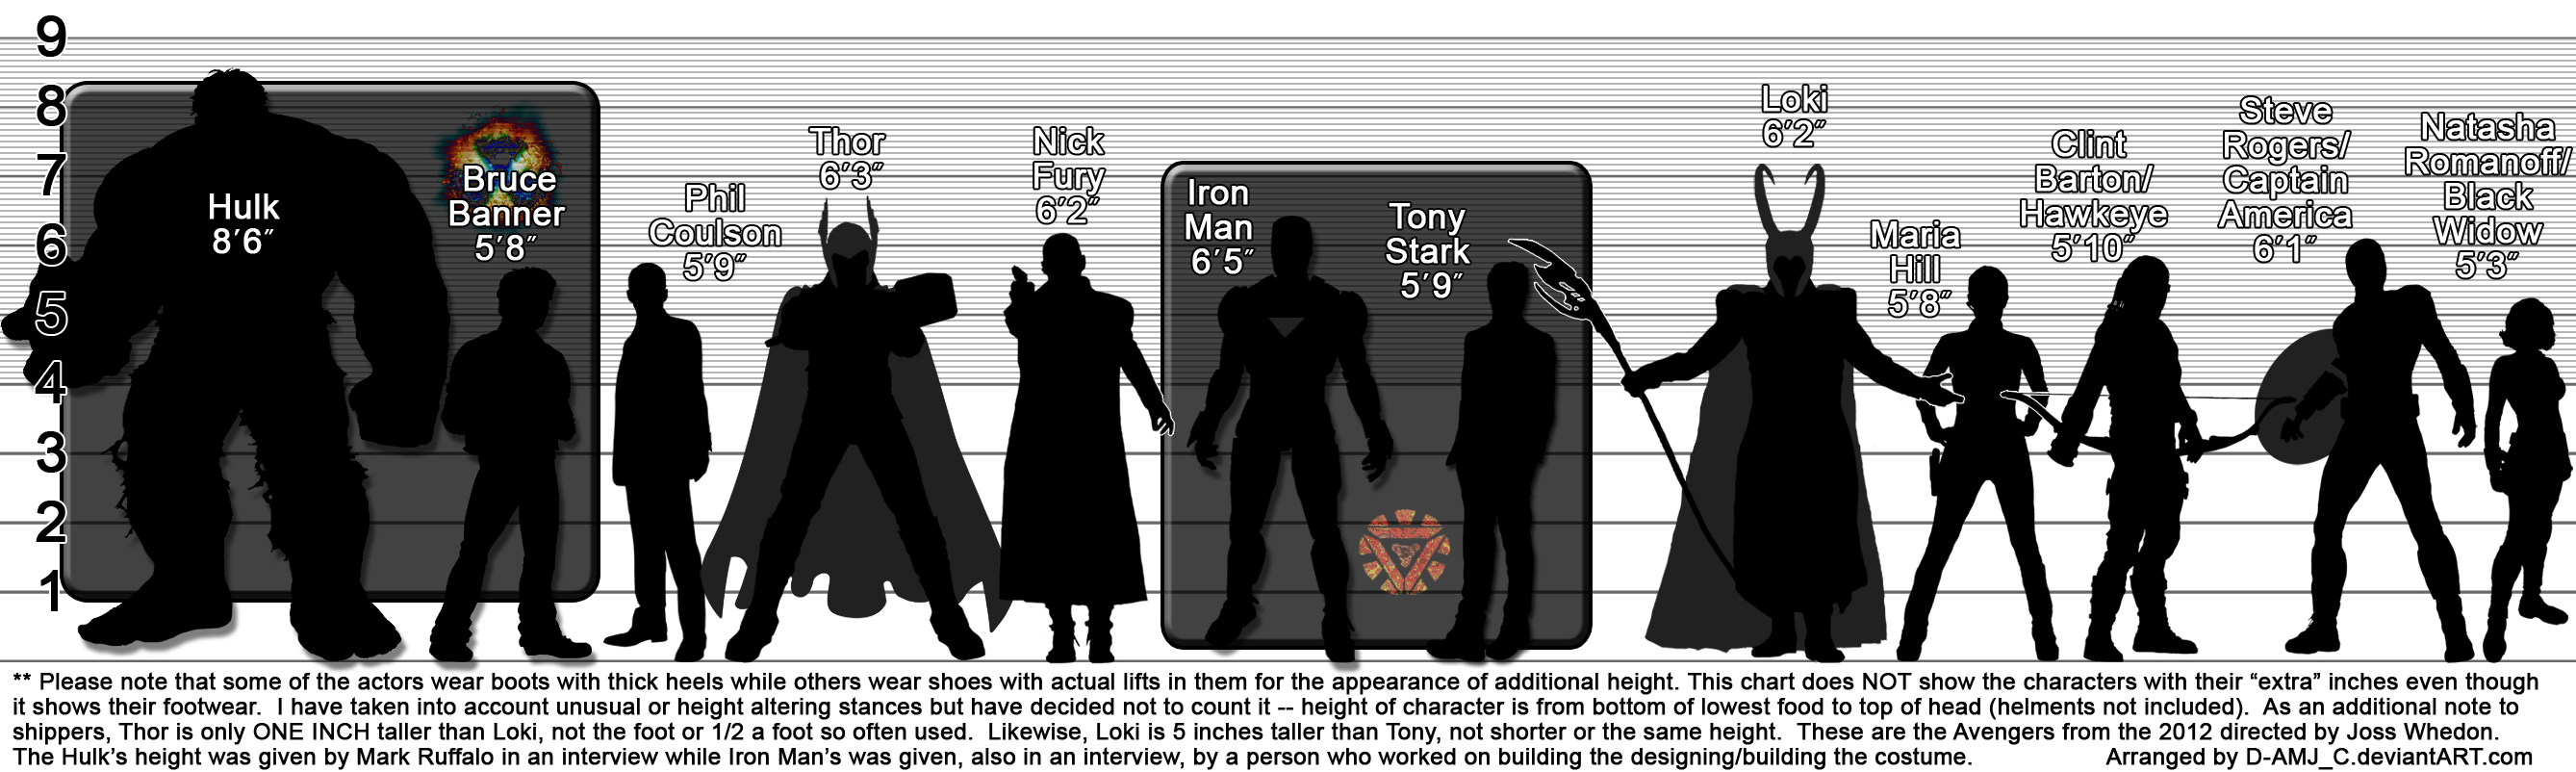 the_avengers__2012__height_chart___corrected_by_d_amj_c-d5byz8z.png